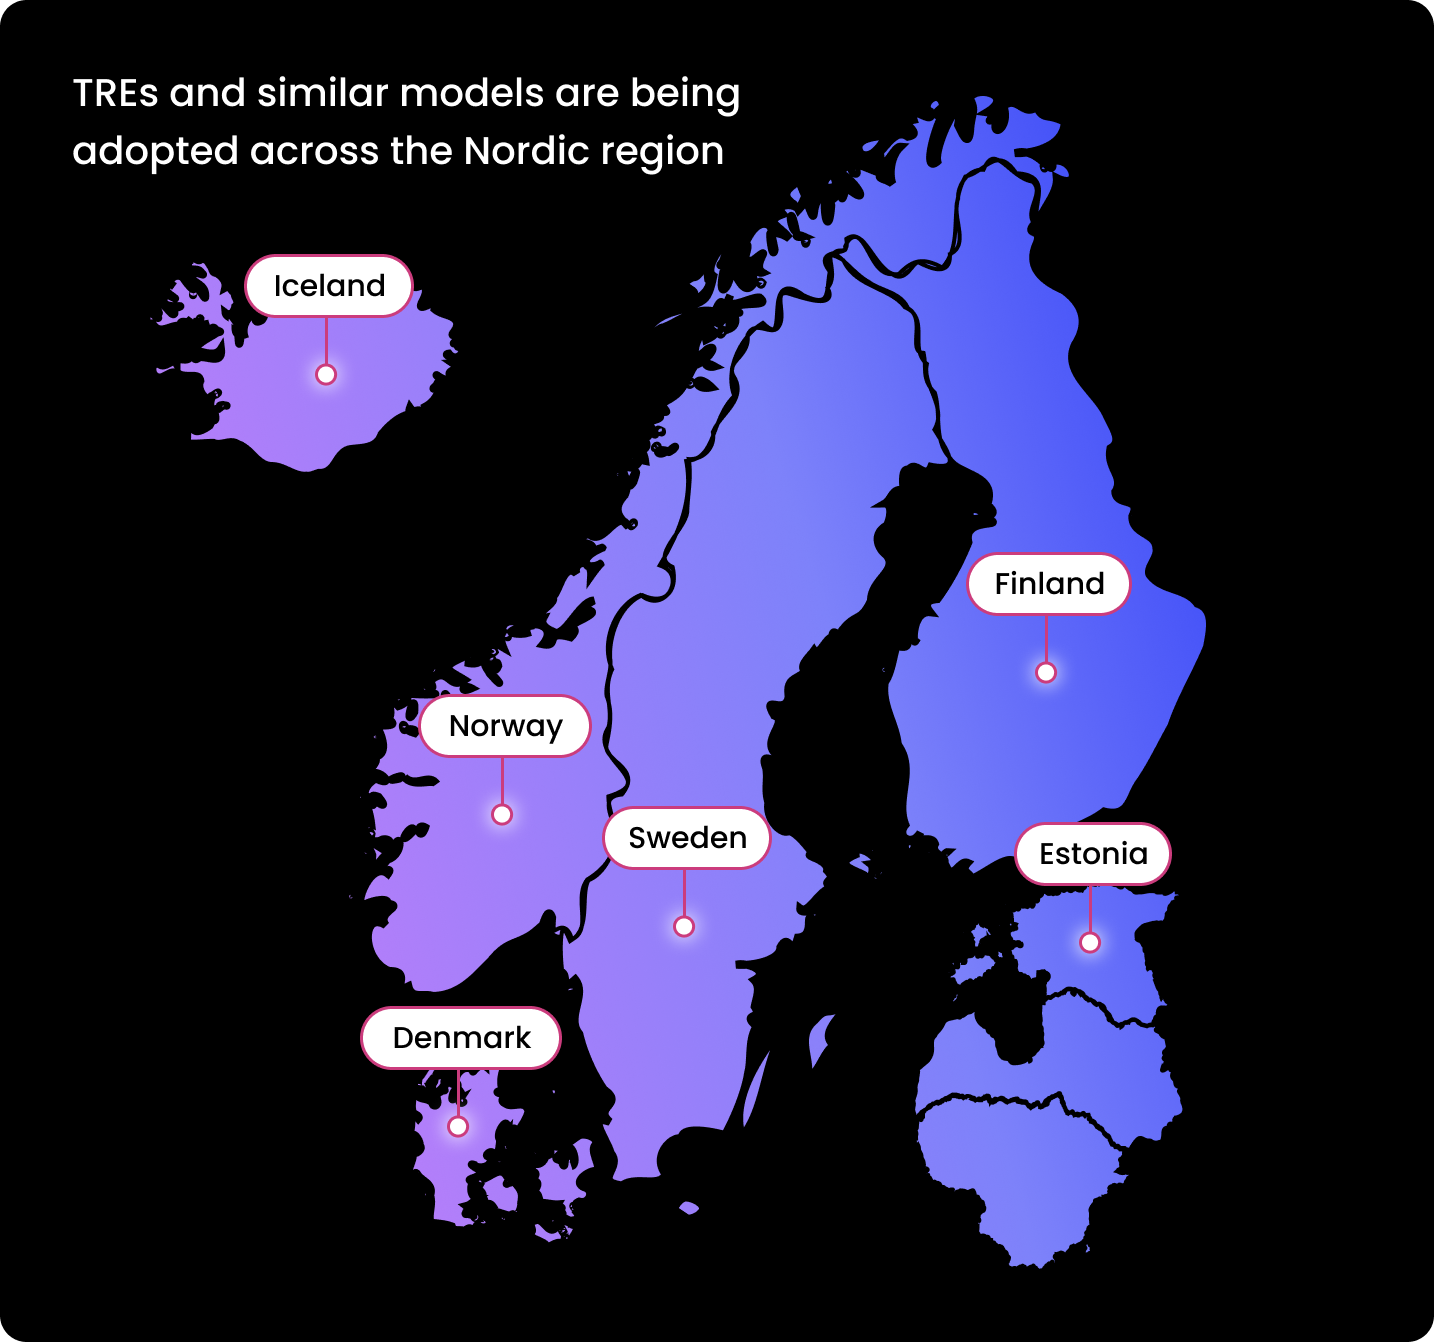 Trusted Research environments (TREs) in the Nordic region